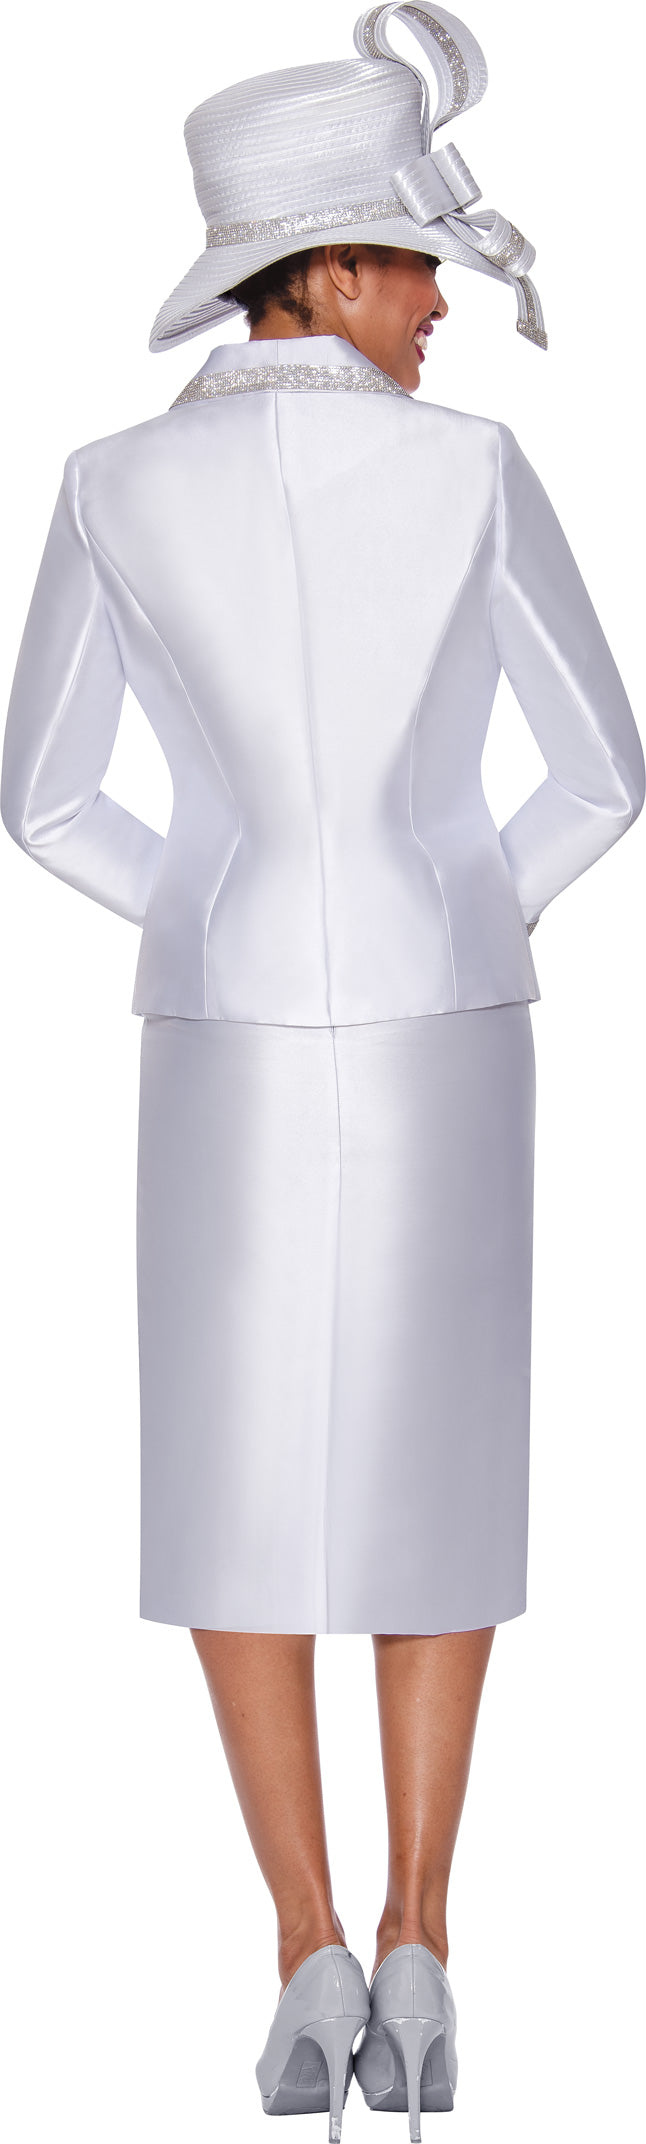 Mother of the Bride Dresses Two Piece Mother of the Bride Jacket Skirt Set White